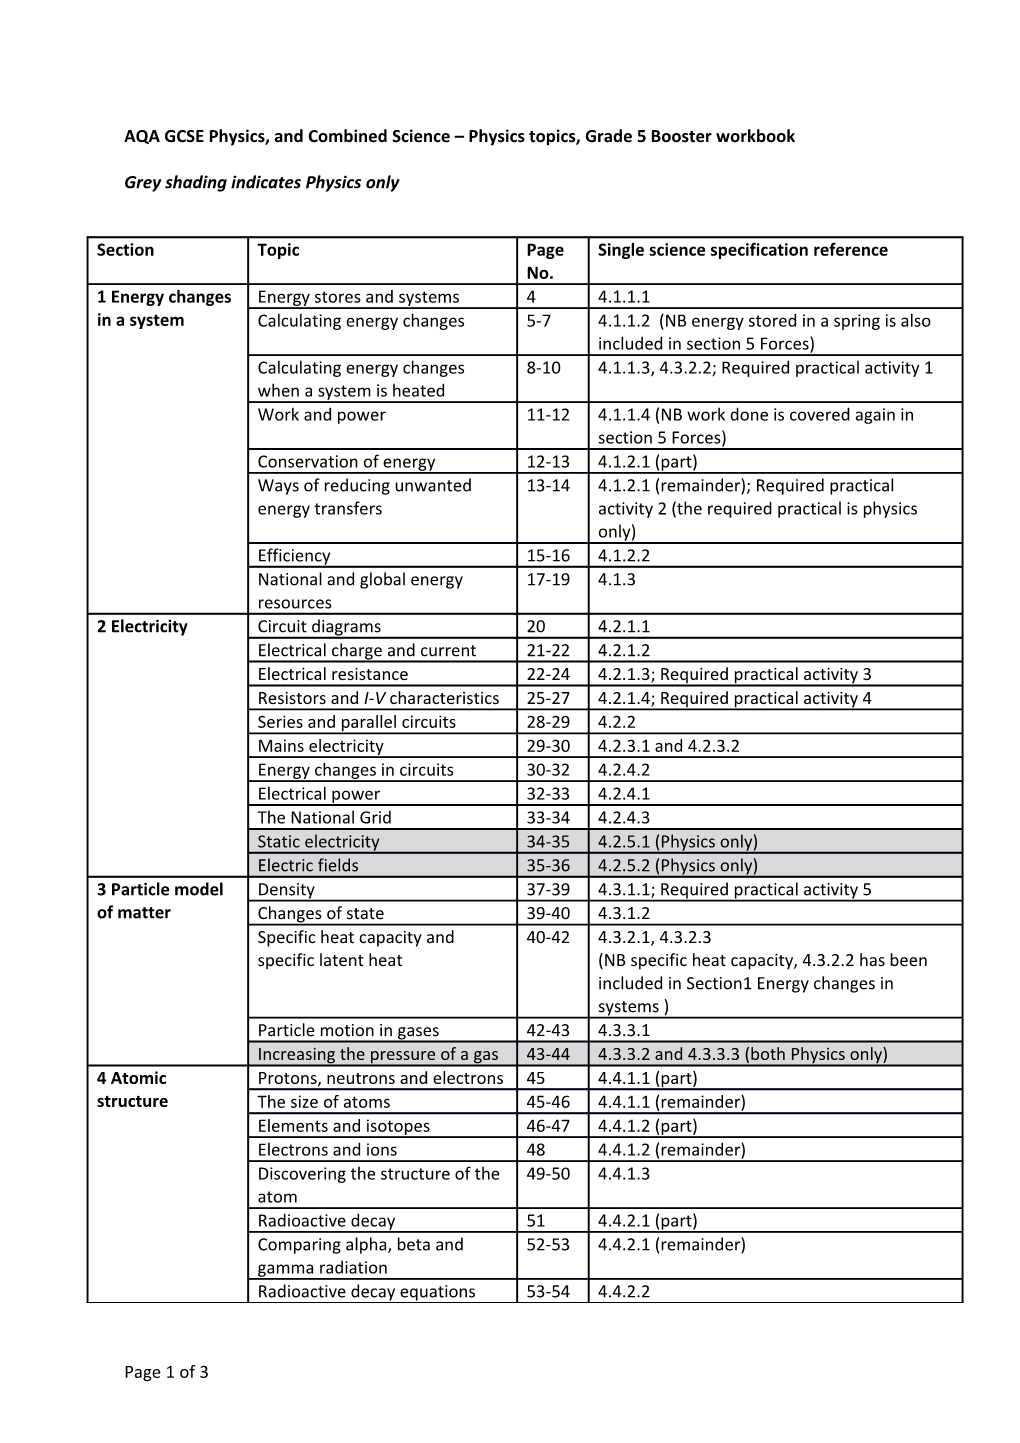 AQA GCSE Physics, and Combined Science Physics Topics, Grade 5 Booster Workbook